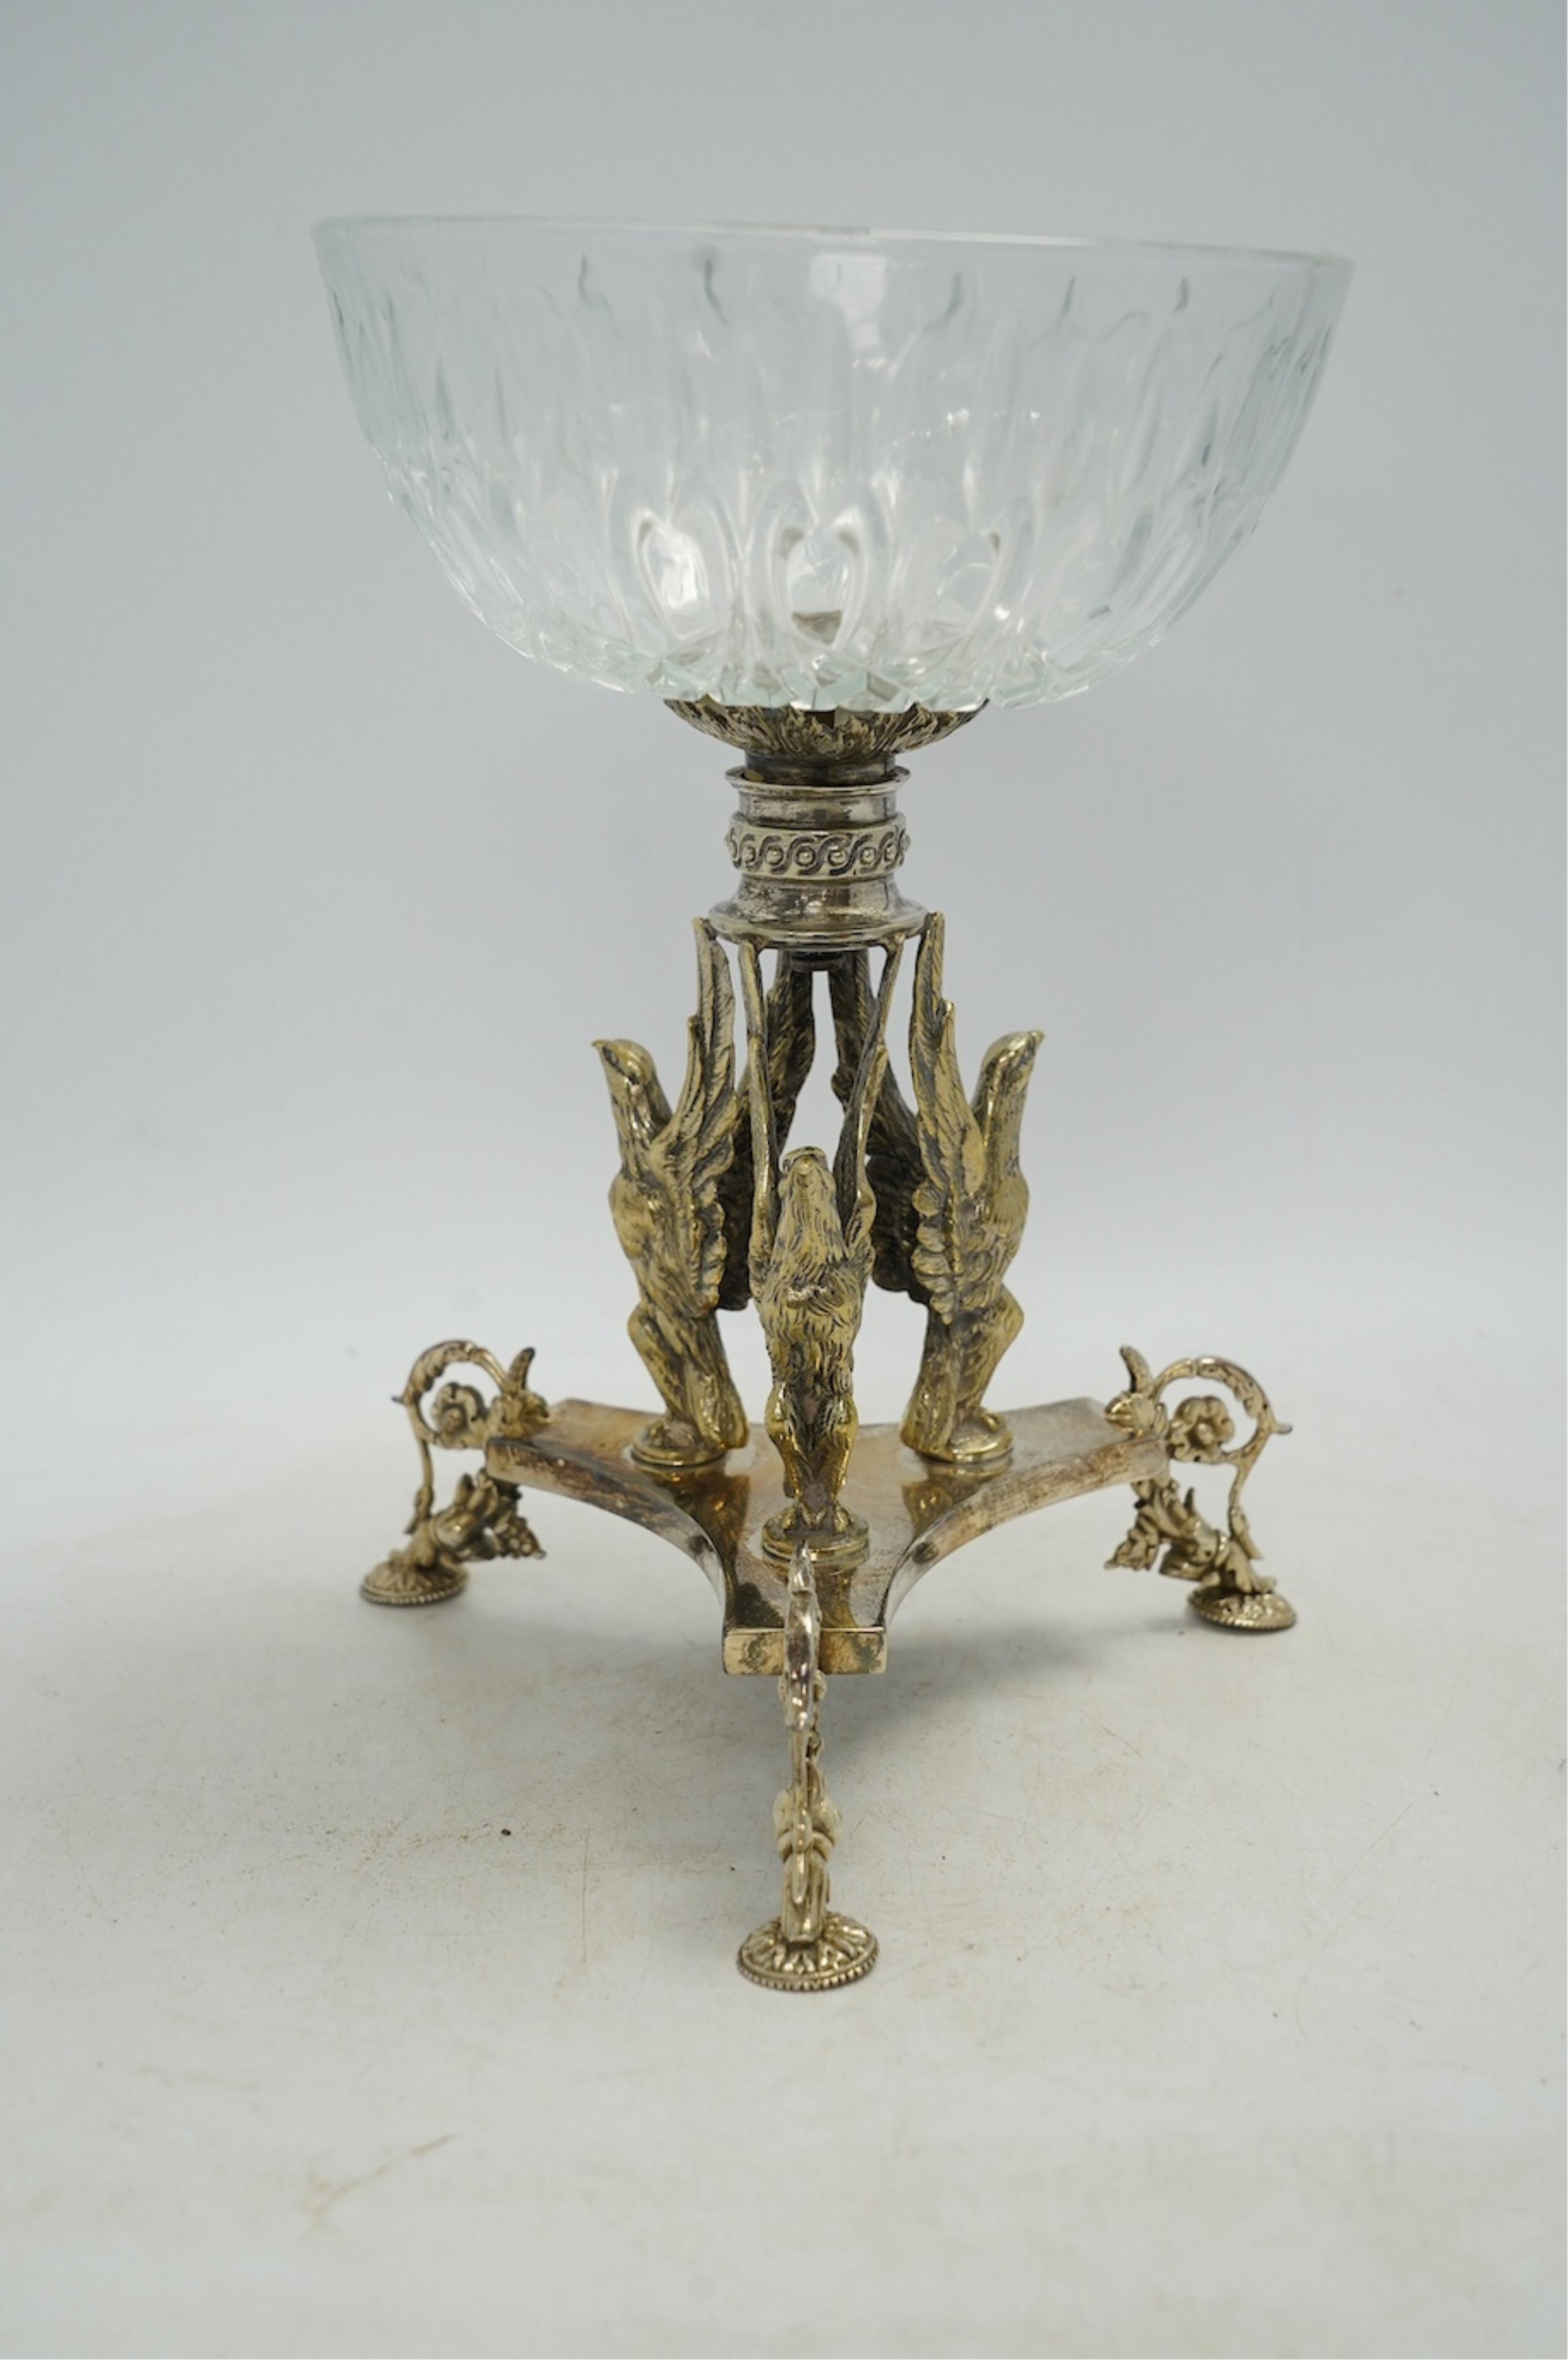 A Victorian electroplated centrepiece with pressed glass bowl, 26.5cm high. Condition - good